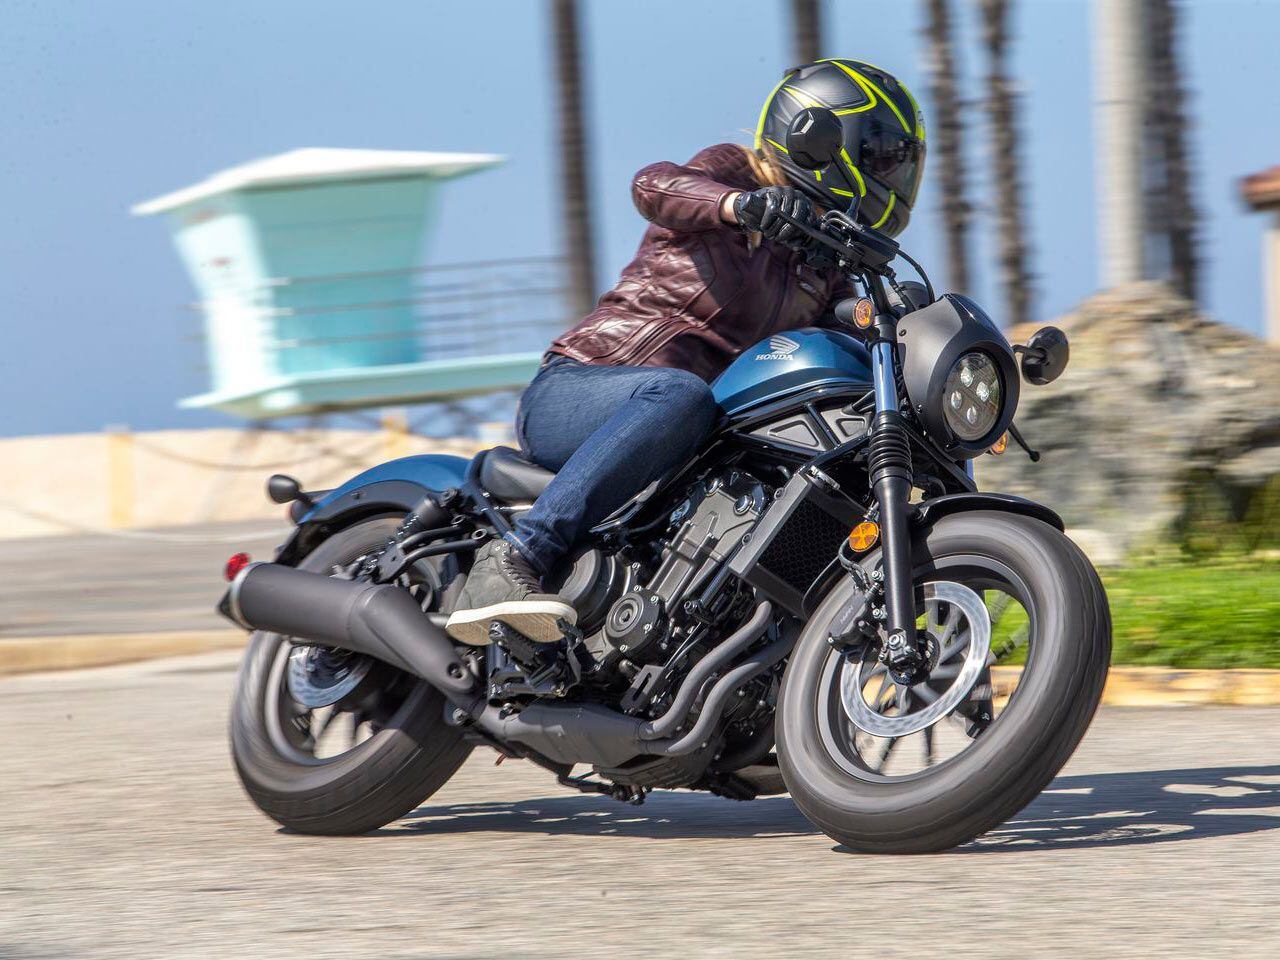 The Honda Rebel 300 and 500 are confidence boosters for women who are just starting out.